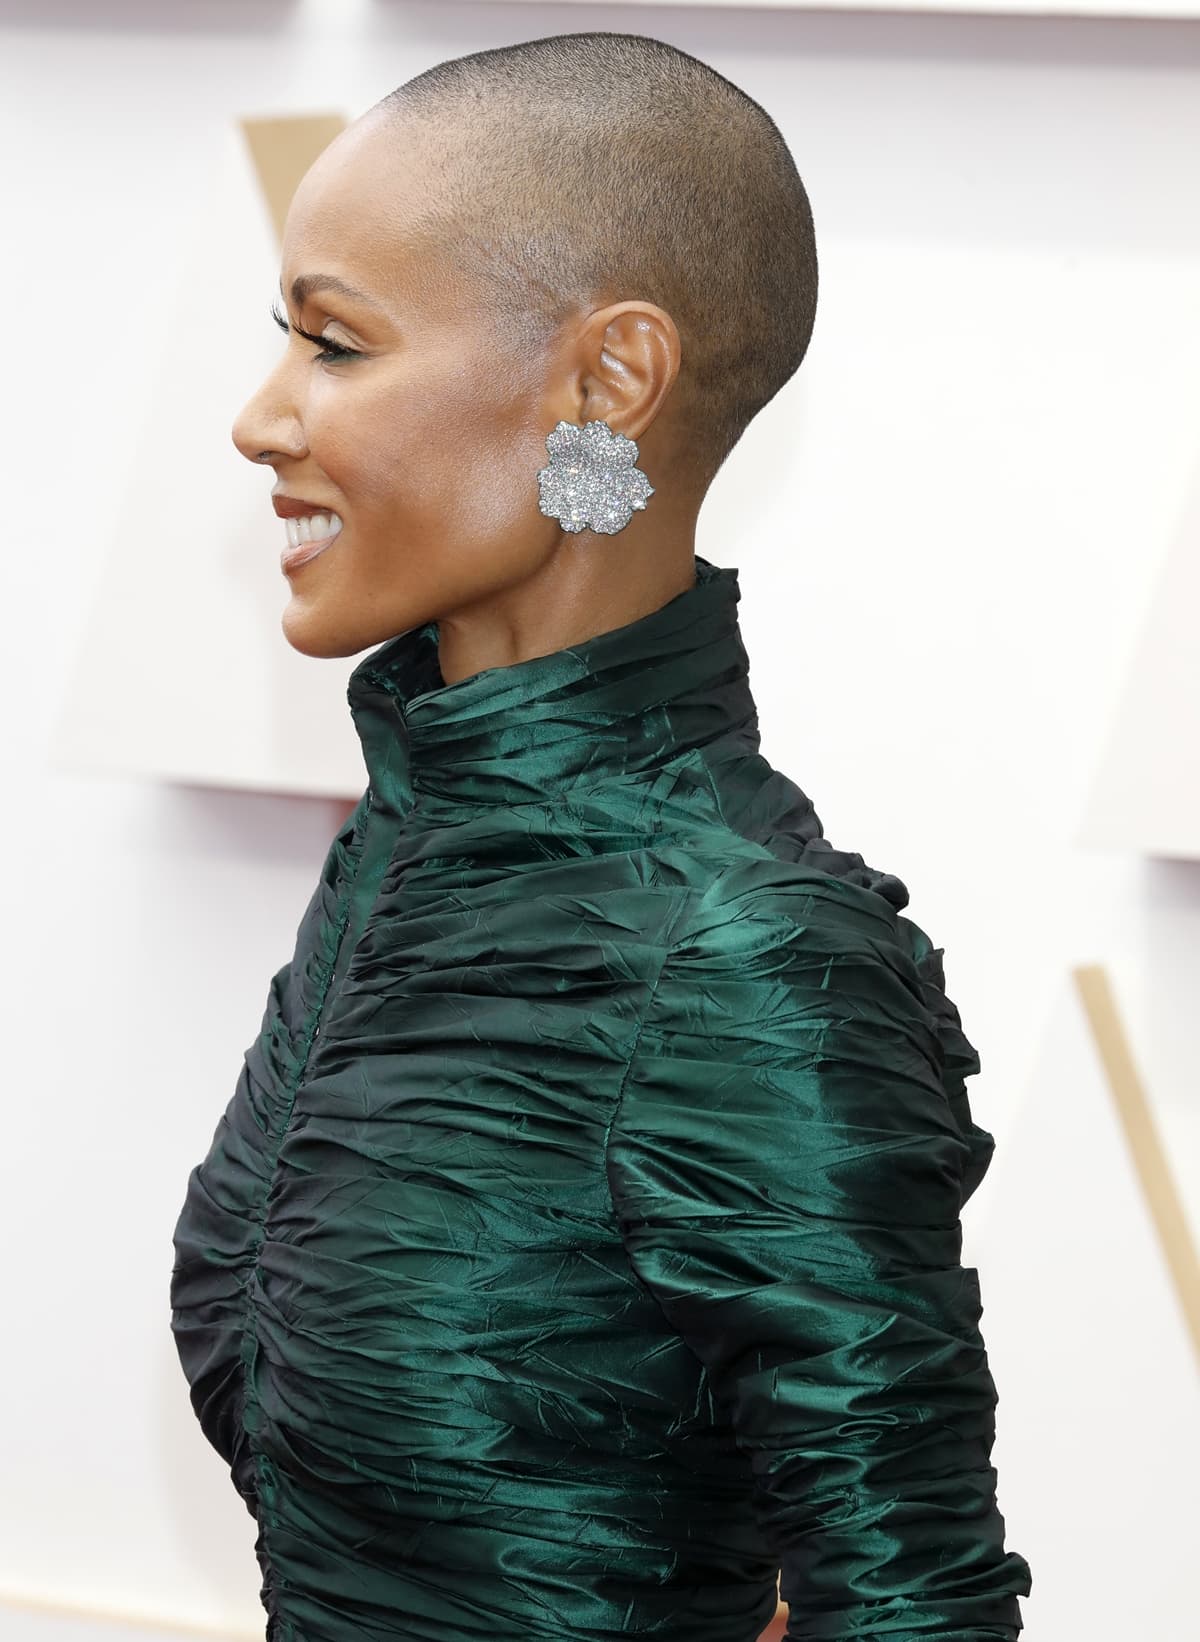 Jada Pinkett Smith got even more attention than she'd hoped for at the 2022 Oscars